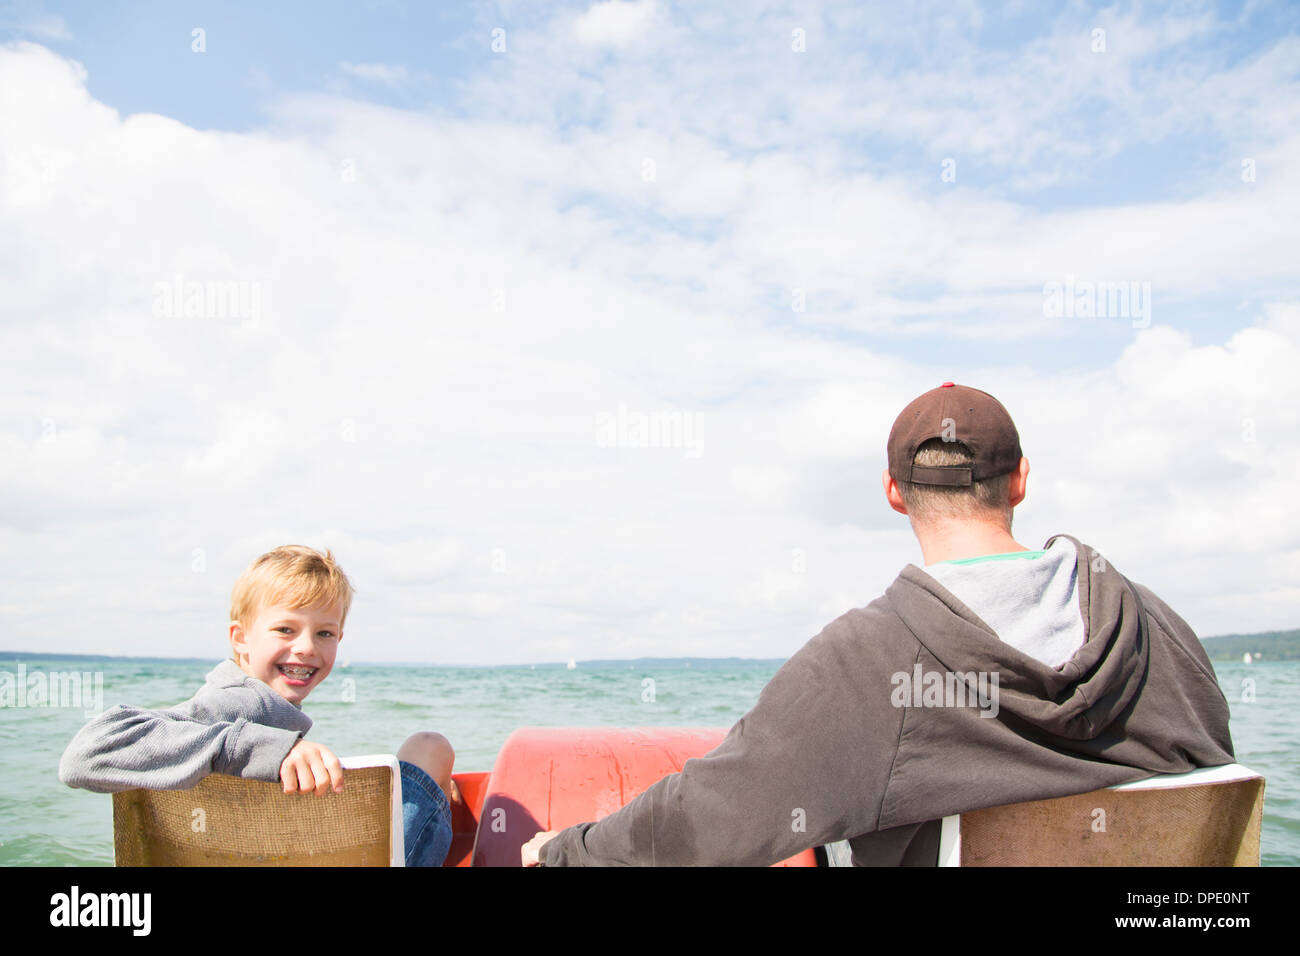 Father and son on pedalo, Lake Ammersee, Bavaria, Germany Stock Photo